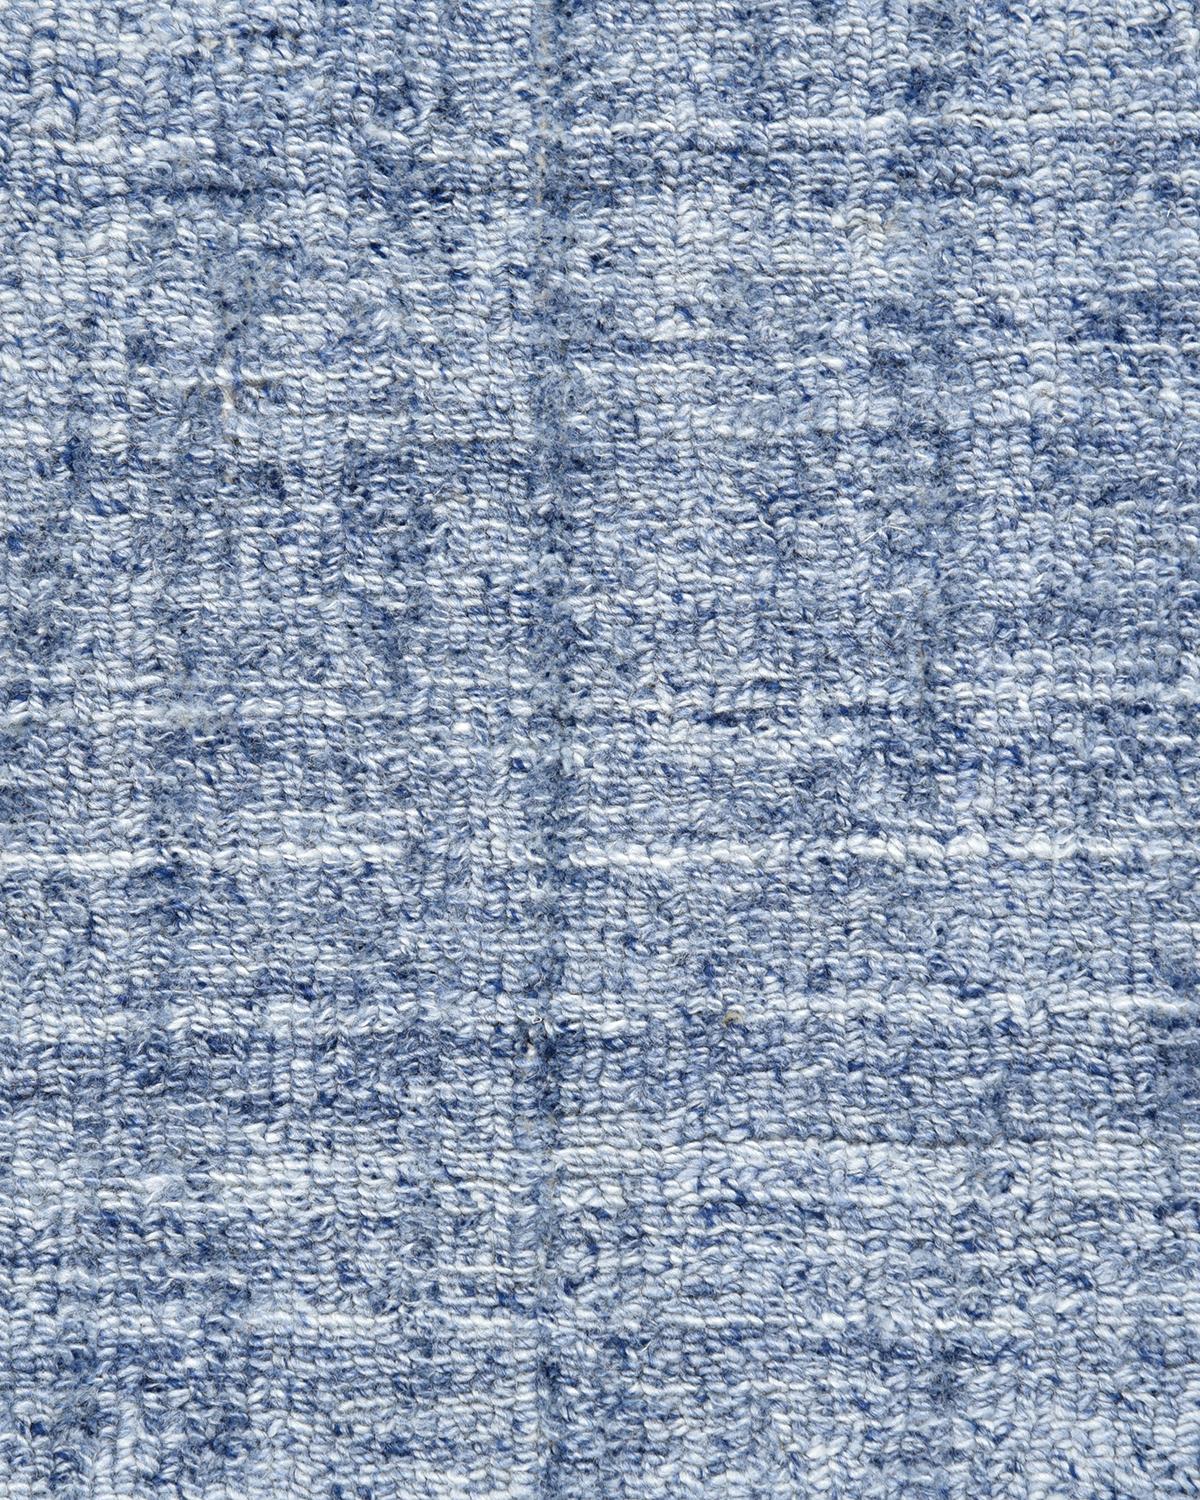 Indian Solo Rugs Modern Striped Hand Loomed Blue Area Rug For Sale